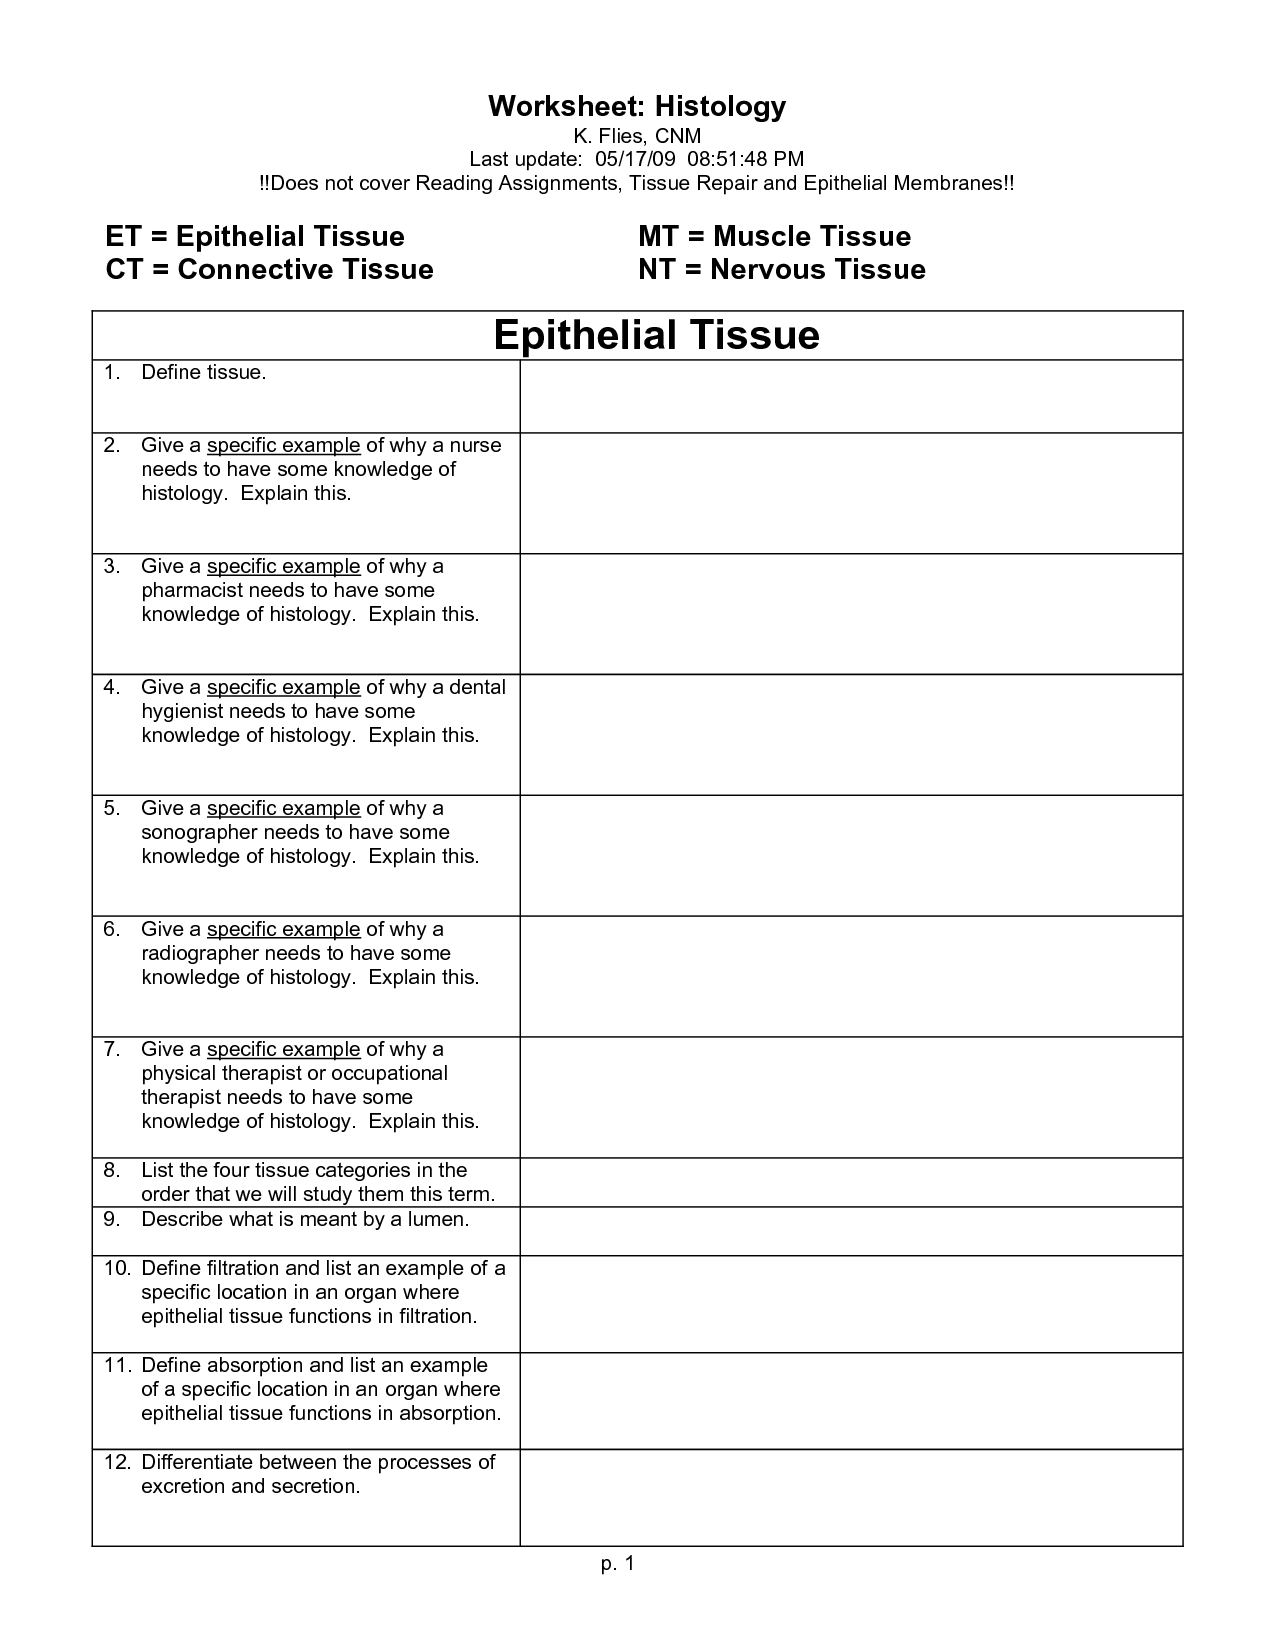 17-best-images-of-for-tissues-and-membranes-worksheets-plant-tissue-worksheet-answers-anatomy